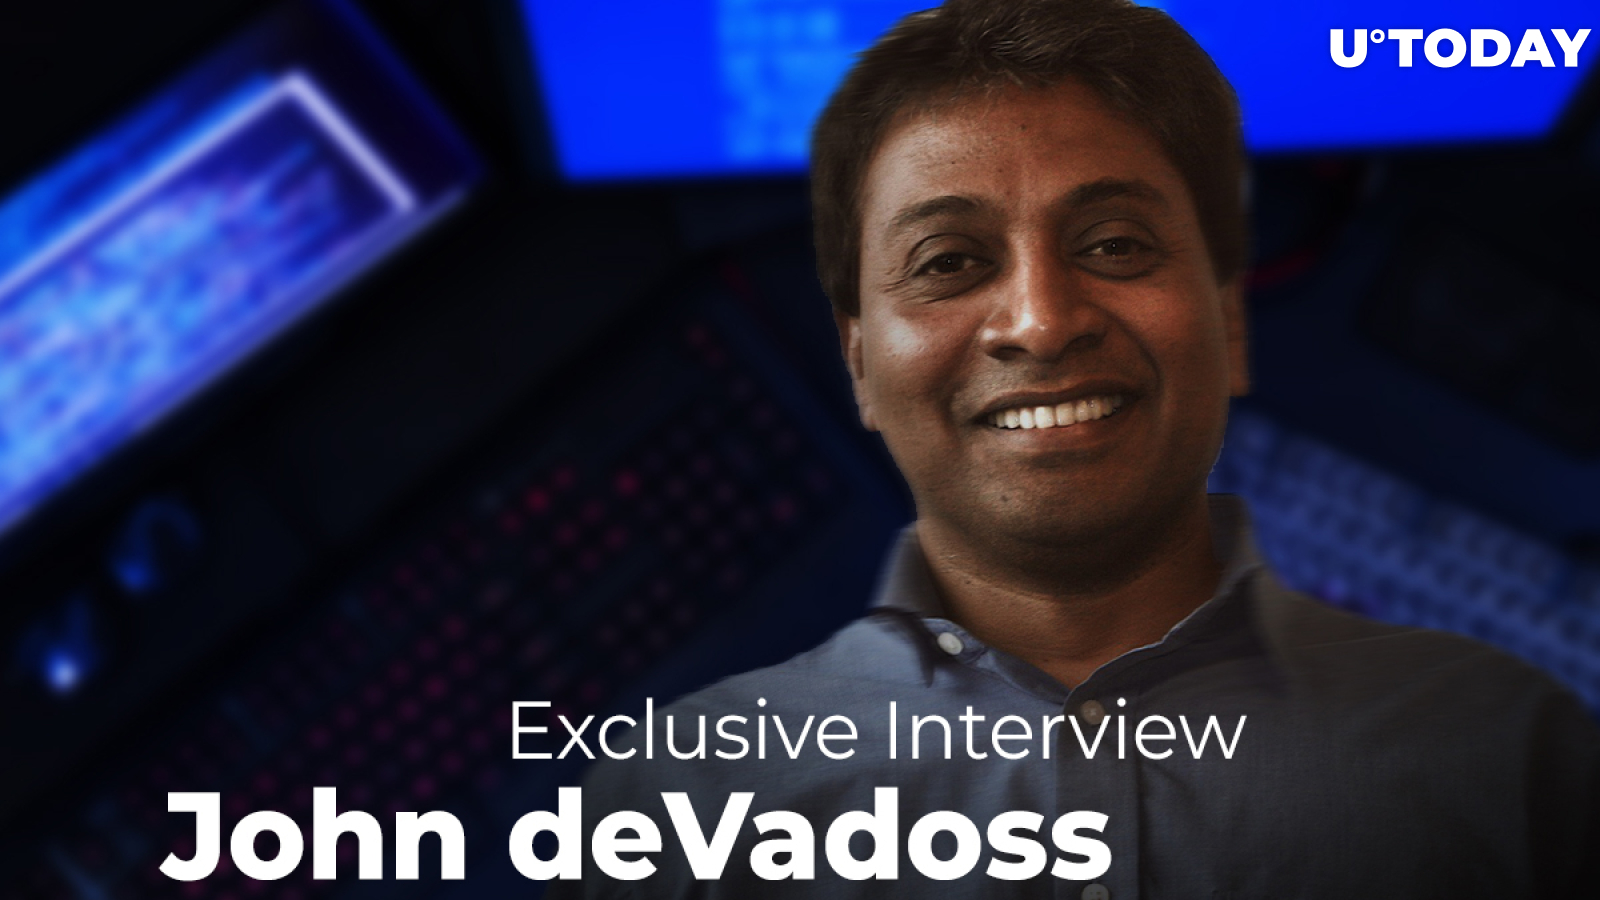 NEO’s Head of Development John deVadoss on NEO 3.0, Microsoft’s Background, Ethereum, and Favourite Cryptocurrencies: Interview